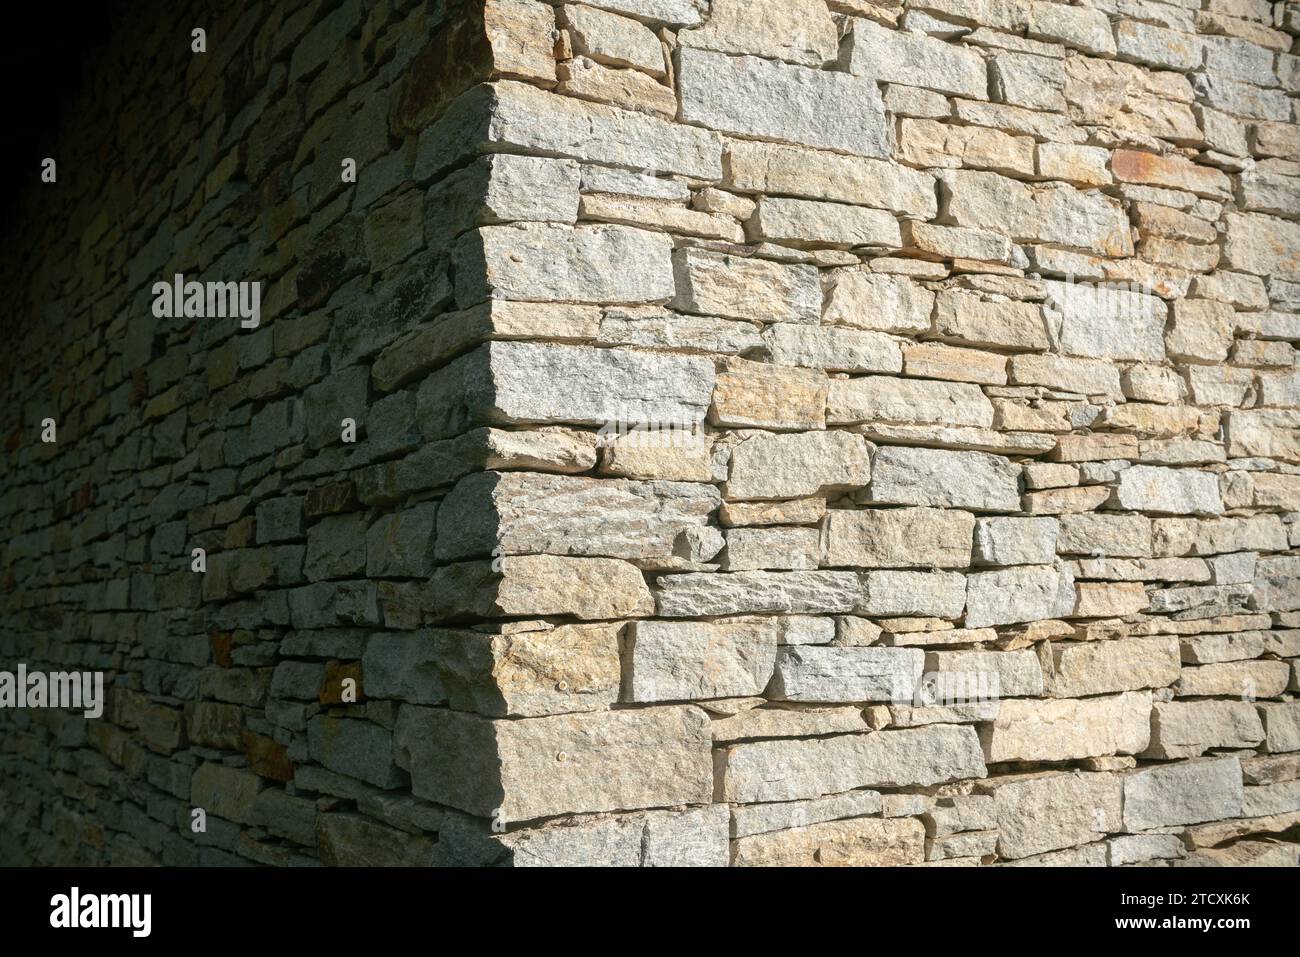 texture of a stone wall with rugged and wrinkled surface, characterized by a variety of earthy tones and intriguing details, offering an atmosphere of Stock Photo